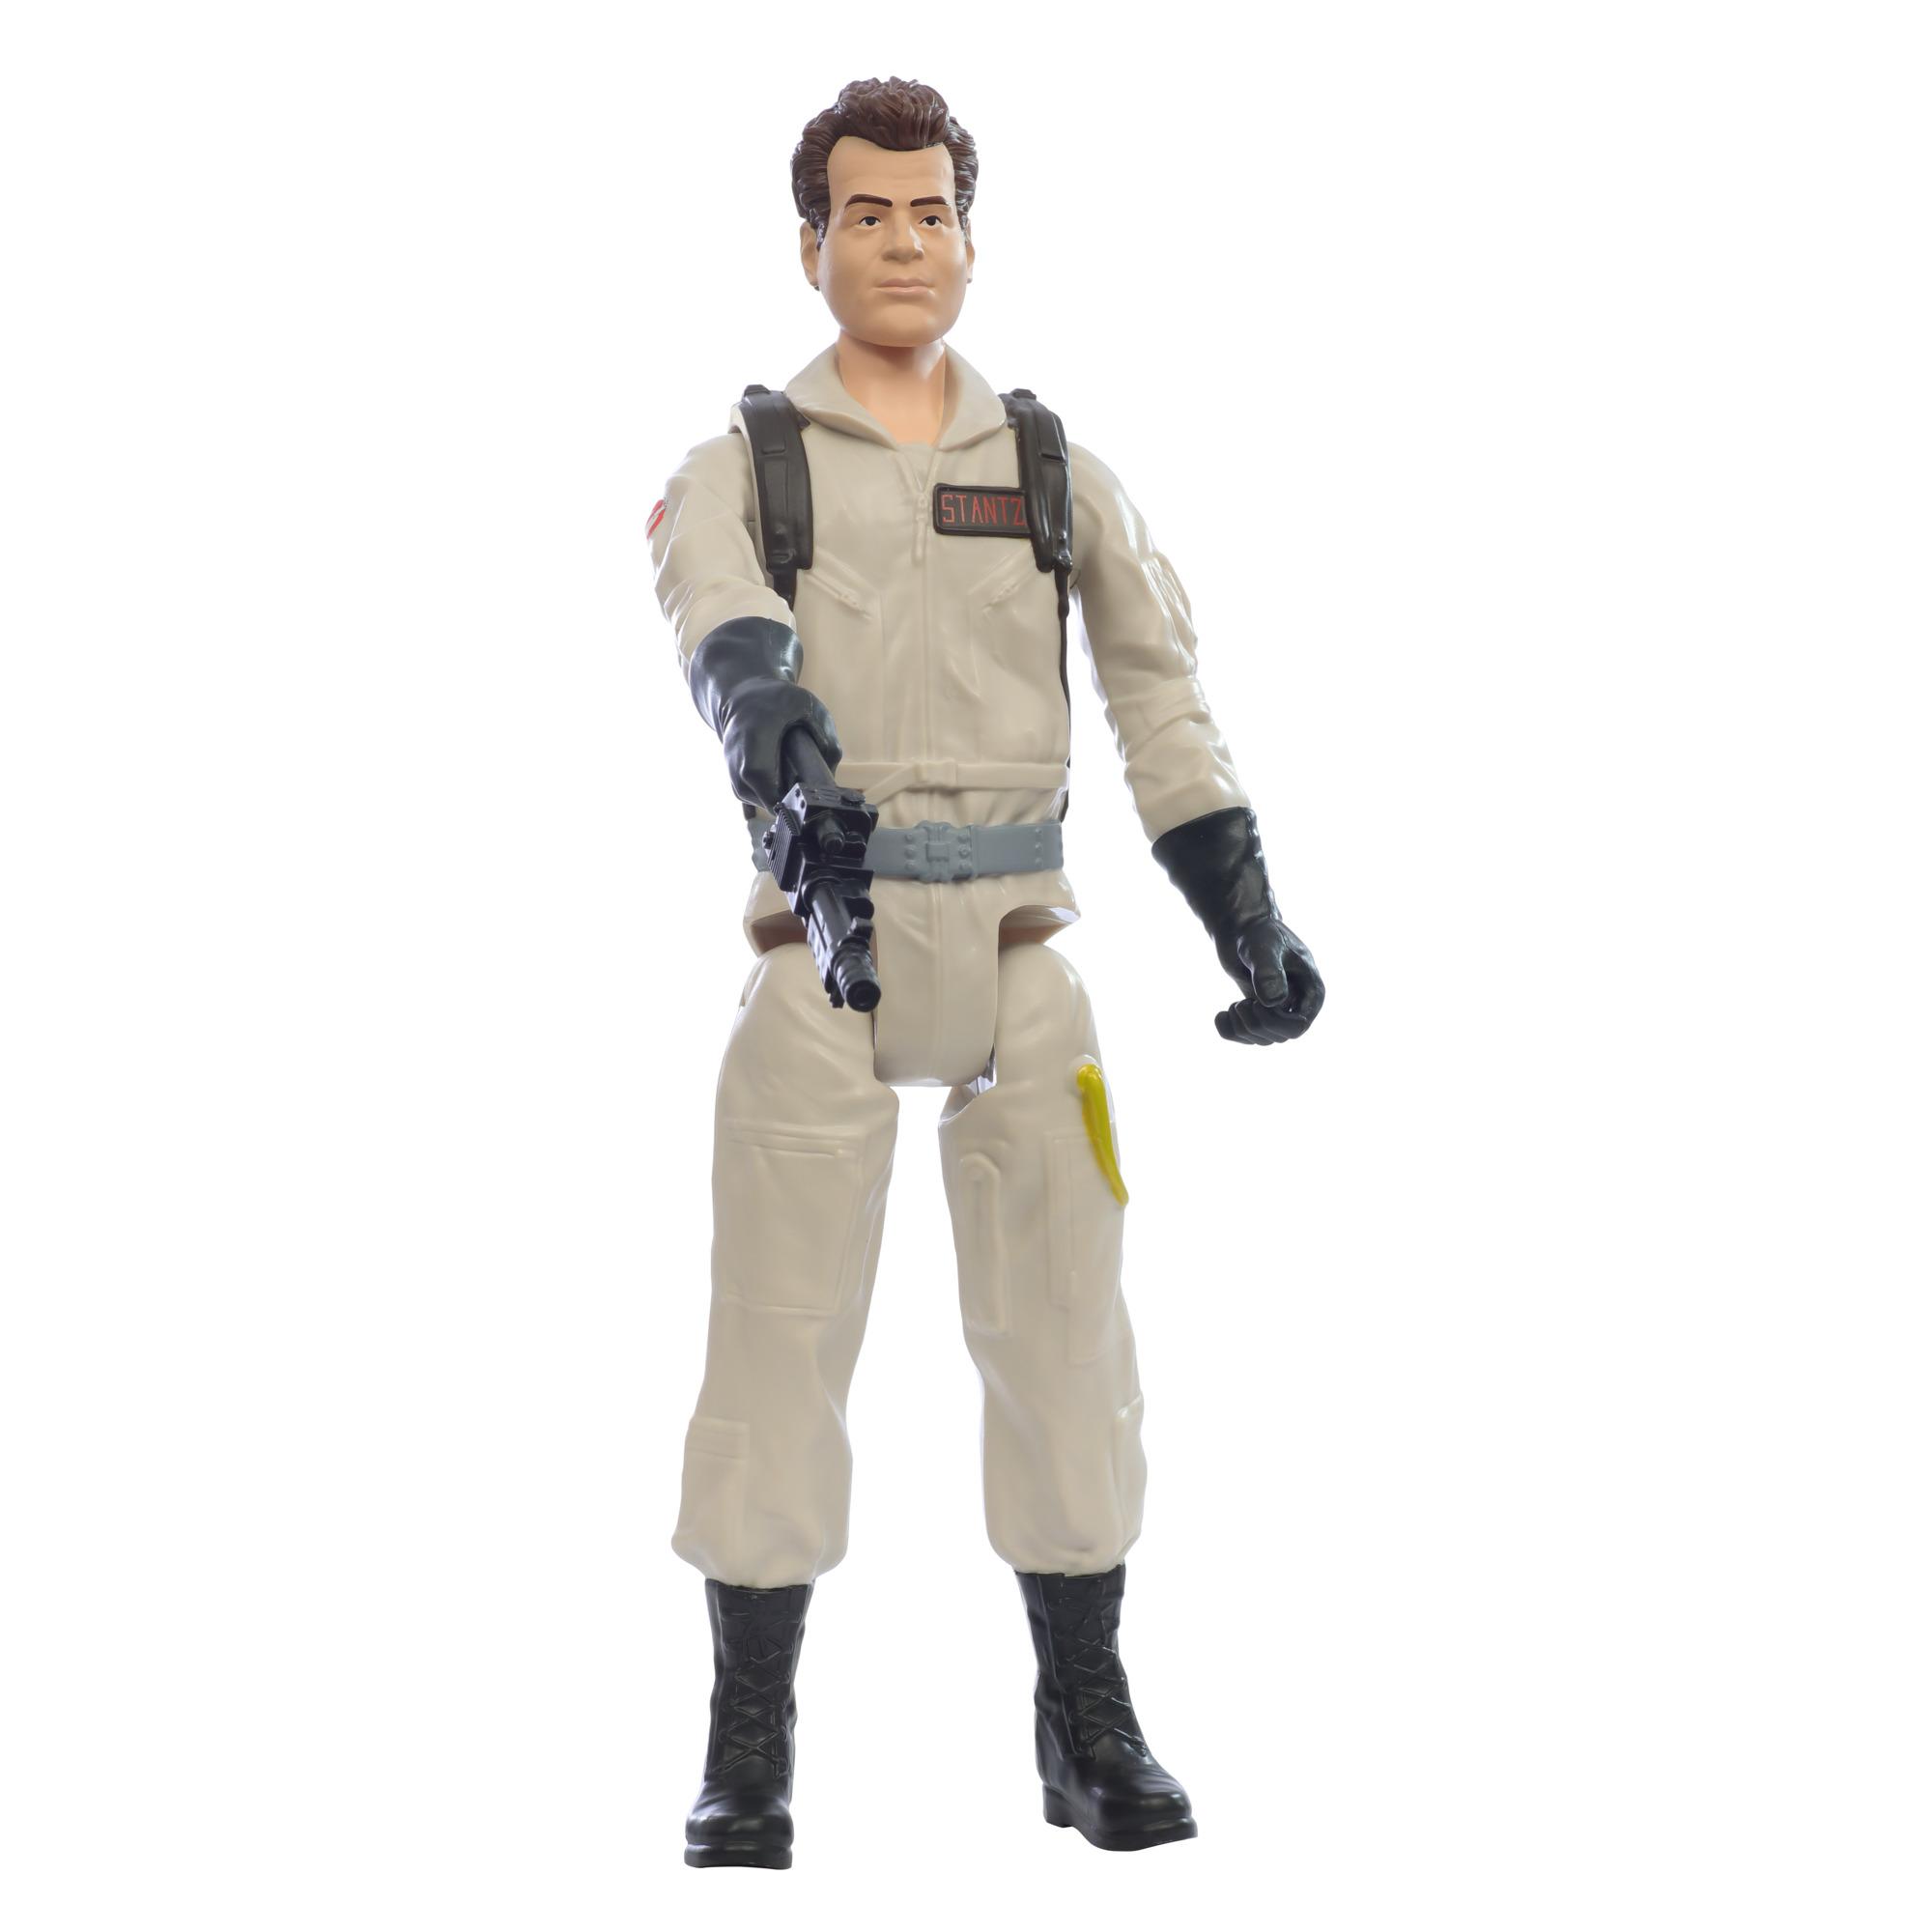 Ghostbusters Ray Stantz Toy 12-Inch-Scale Collectible Classic 1984 Ghostbusters Figure, Toys for Kids Ages 4 and Up